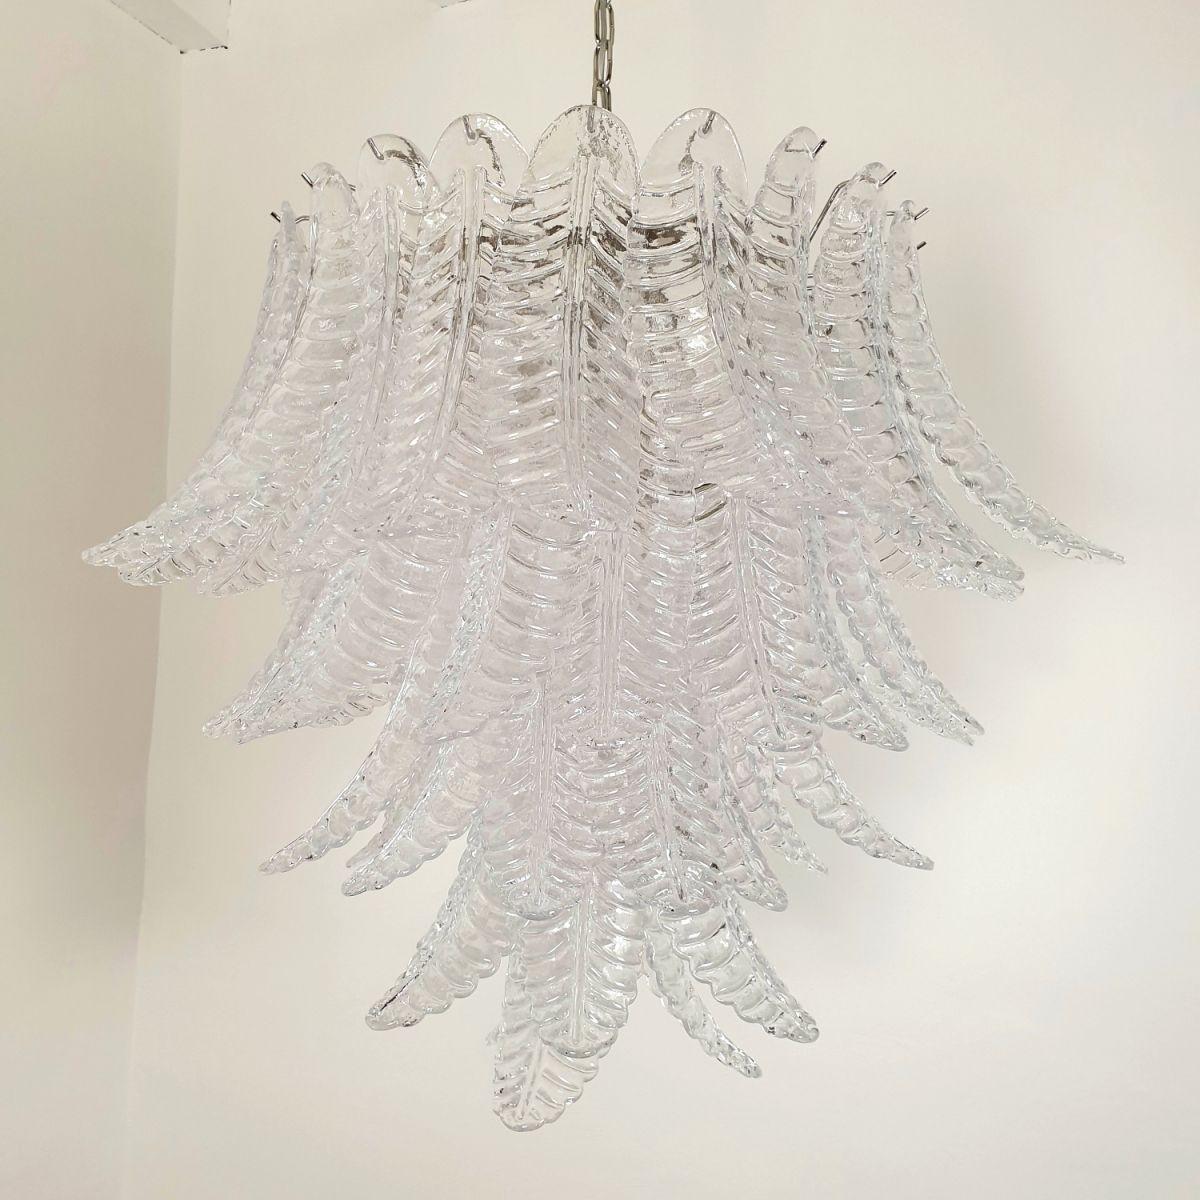 Late 20th Century Murano glass Mid-Century Chandelier, Italy For Sale